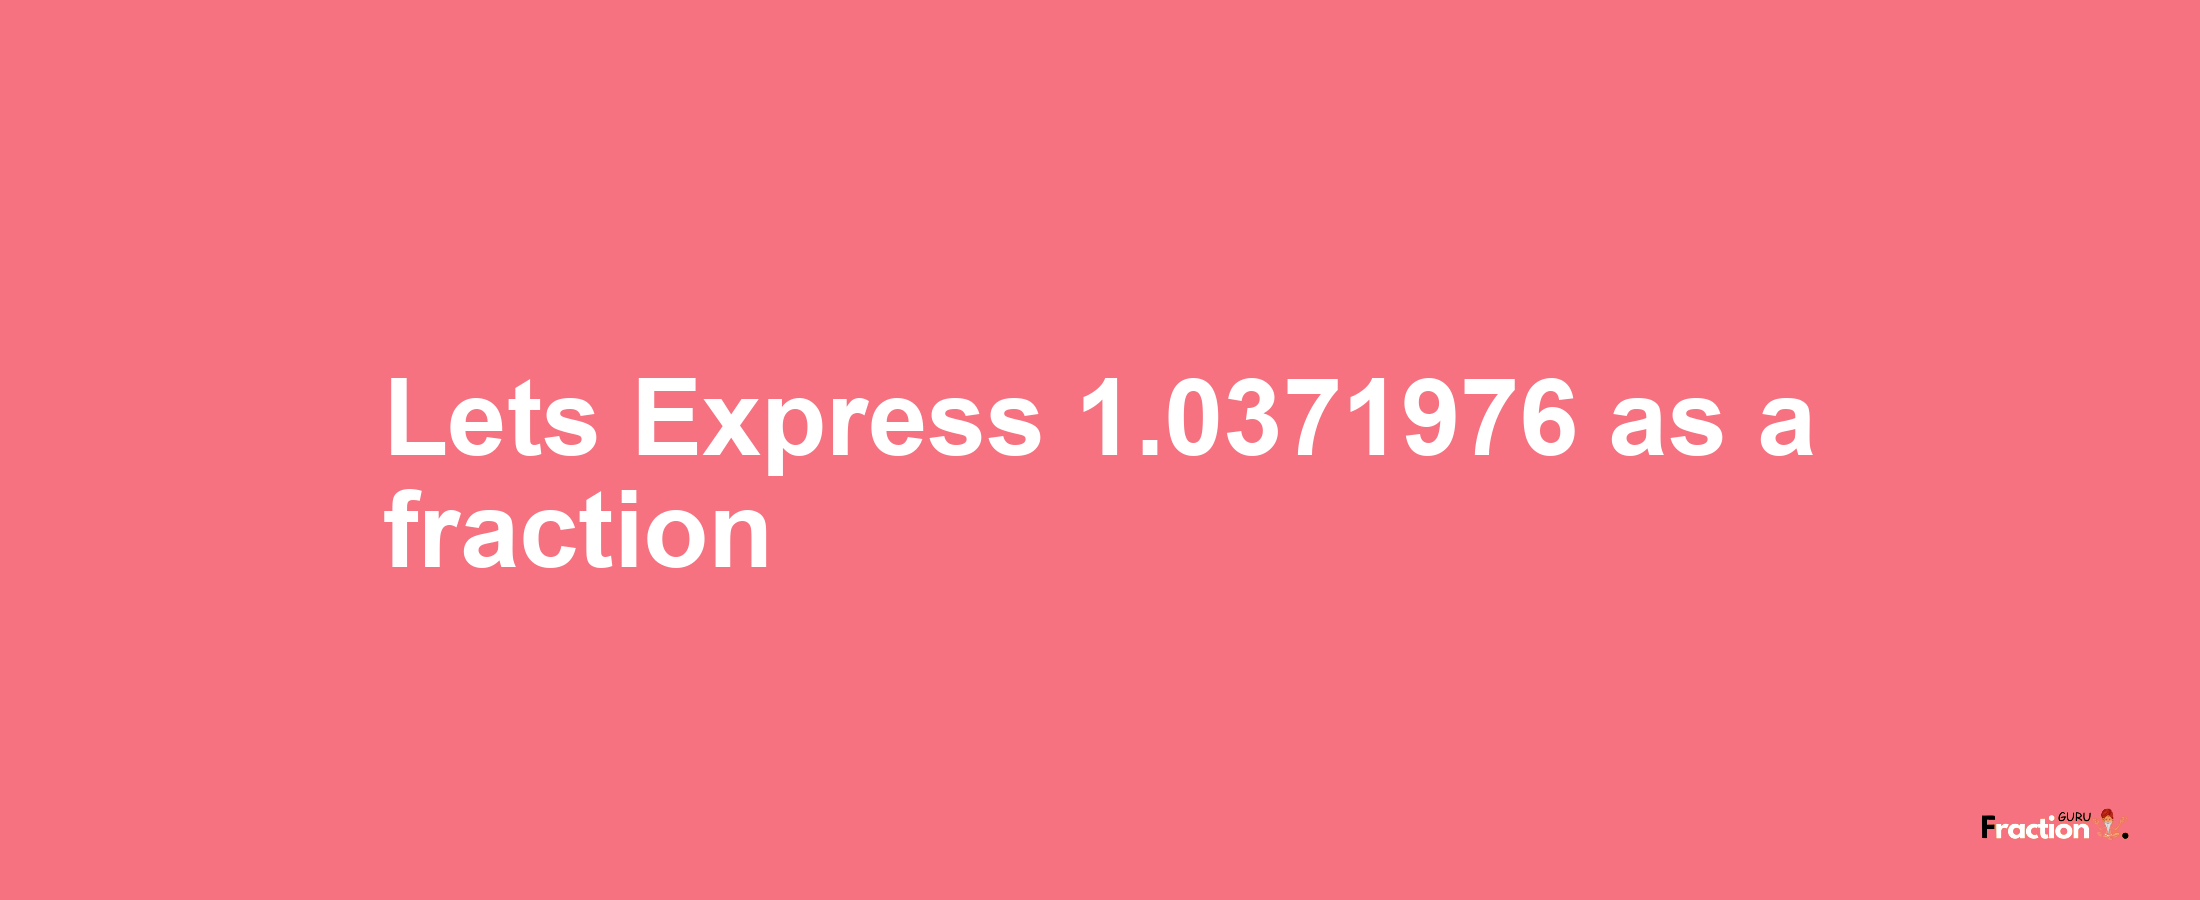 Lets Express 1.0371976 as afraction